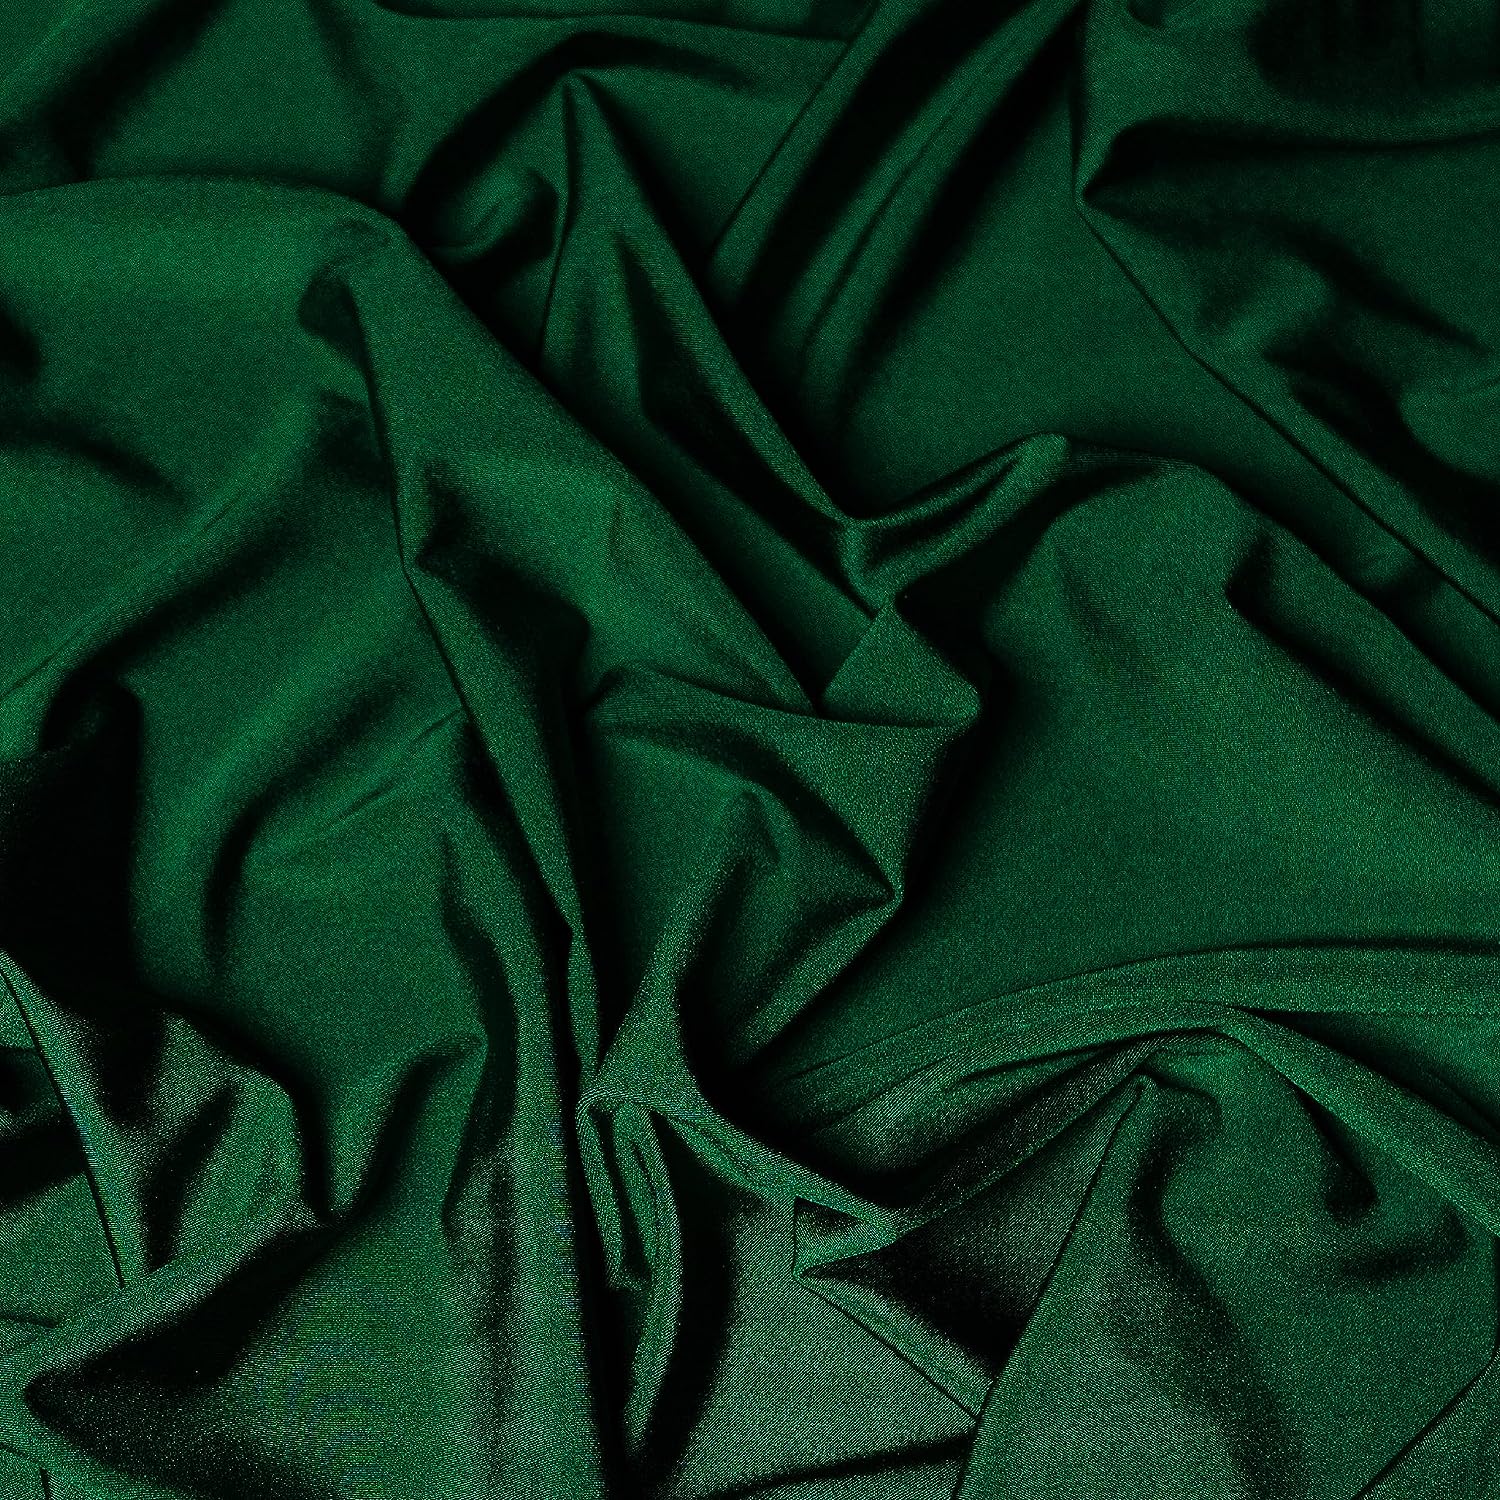 Luxury Sequin Dance Wear Stretch Lycra Fabric Material - KELLY GREEN